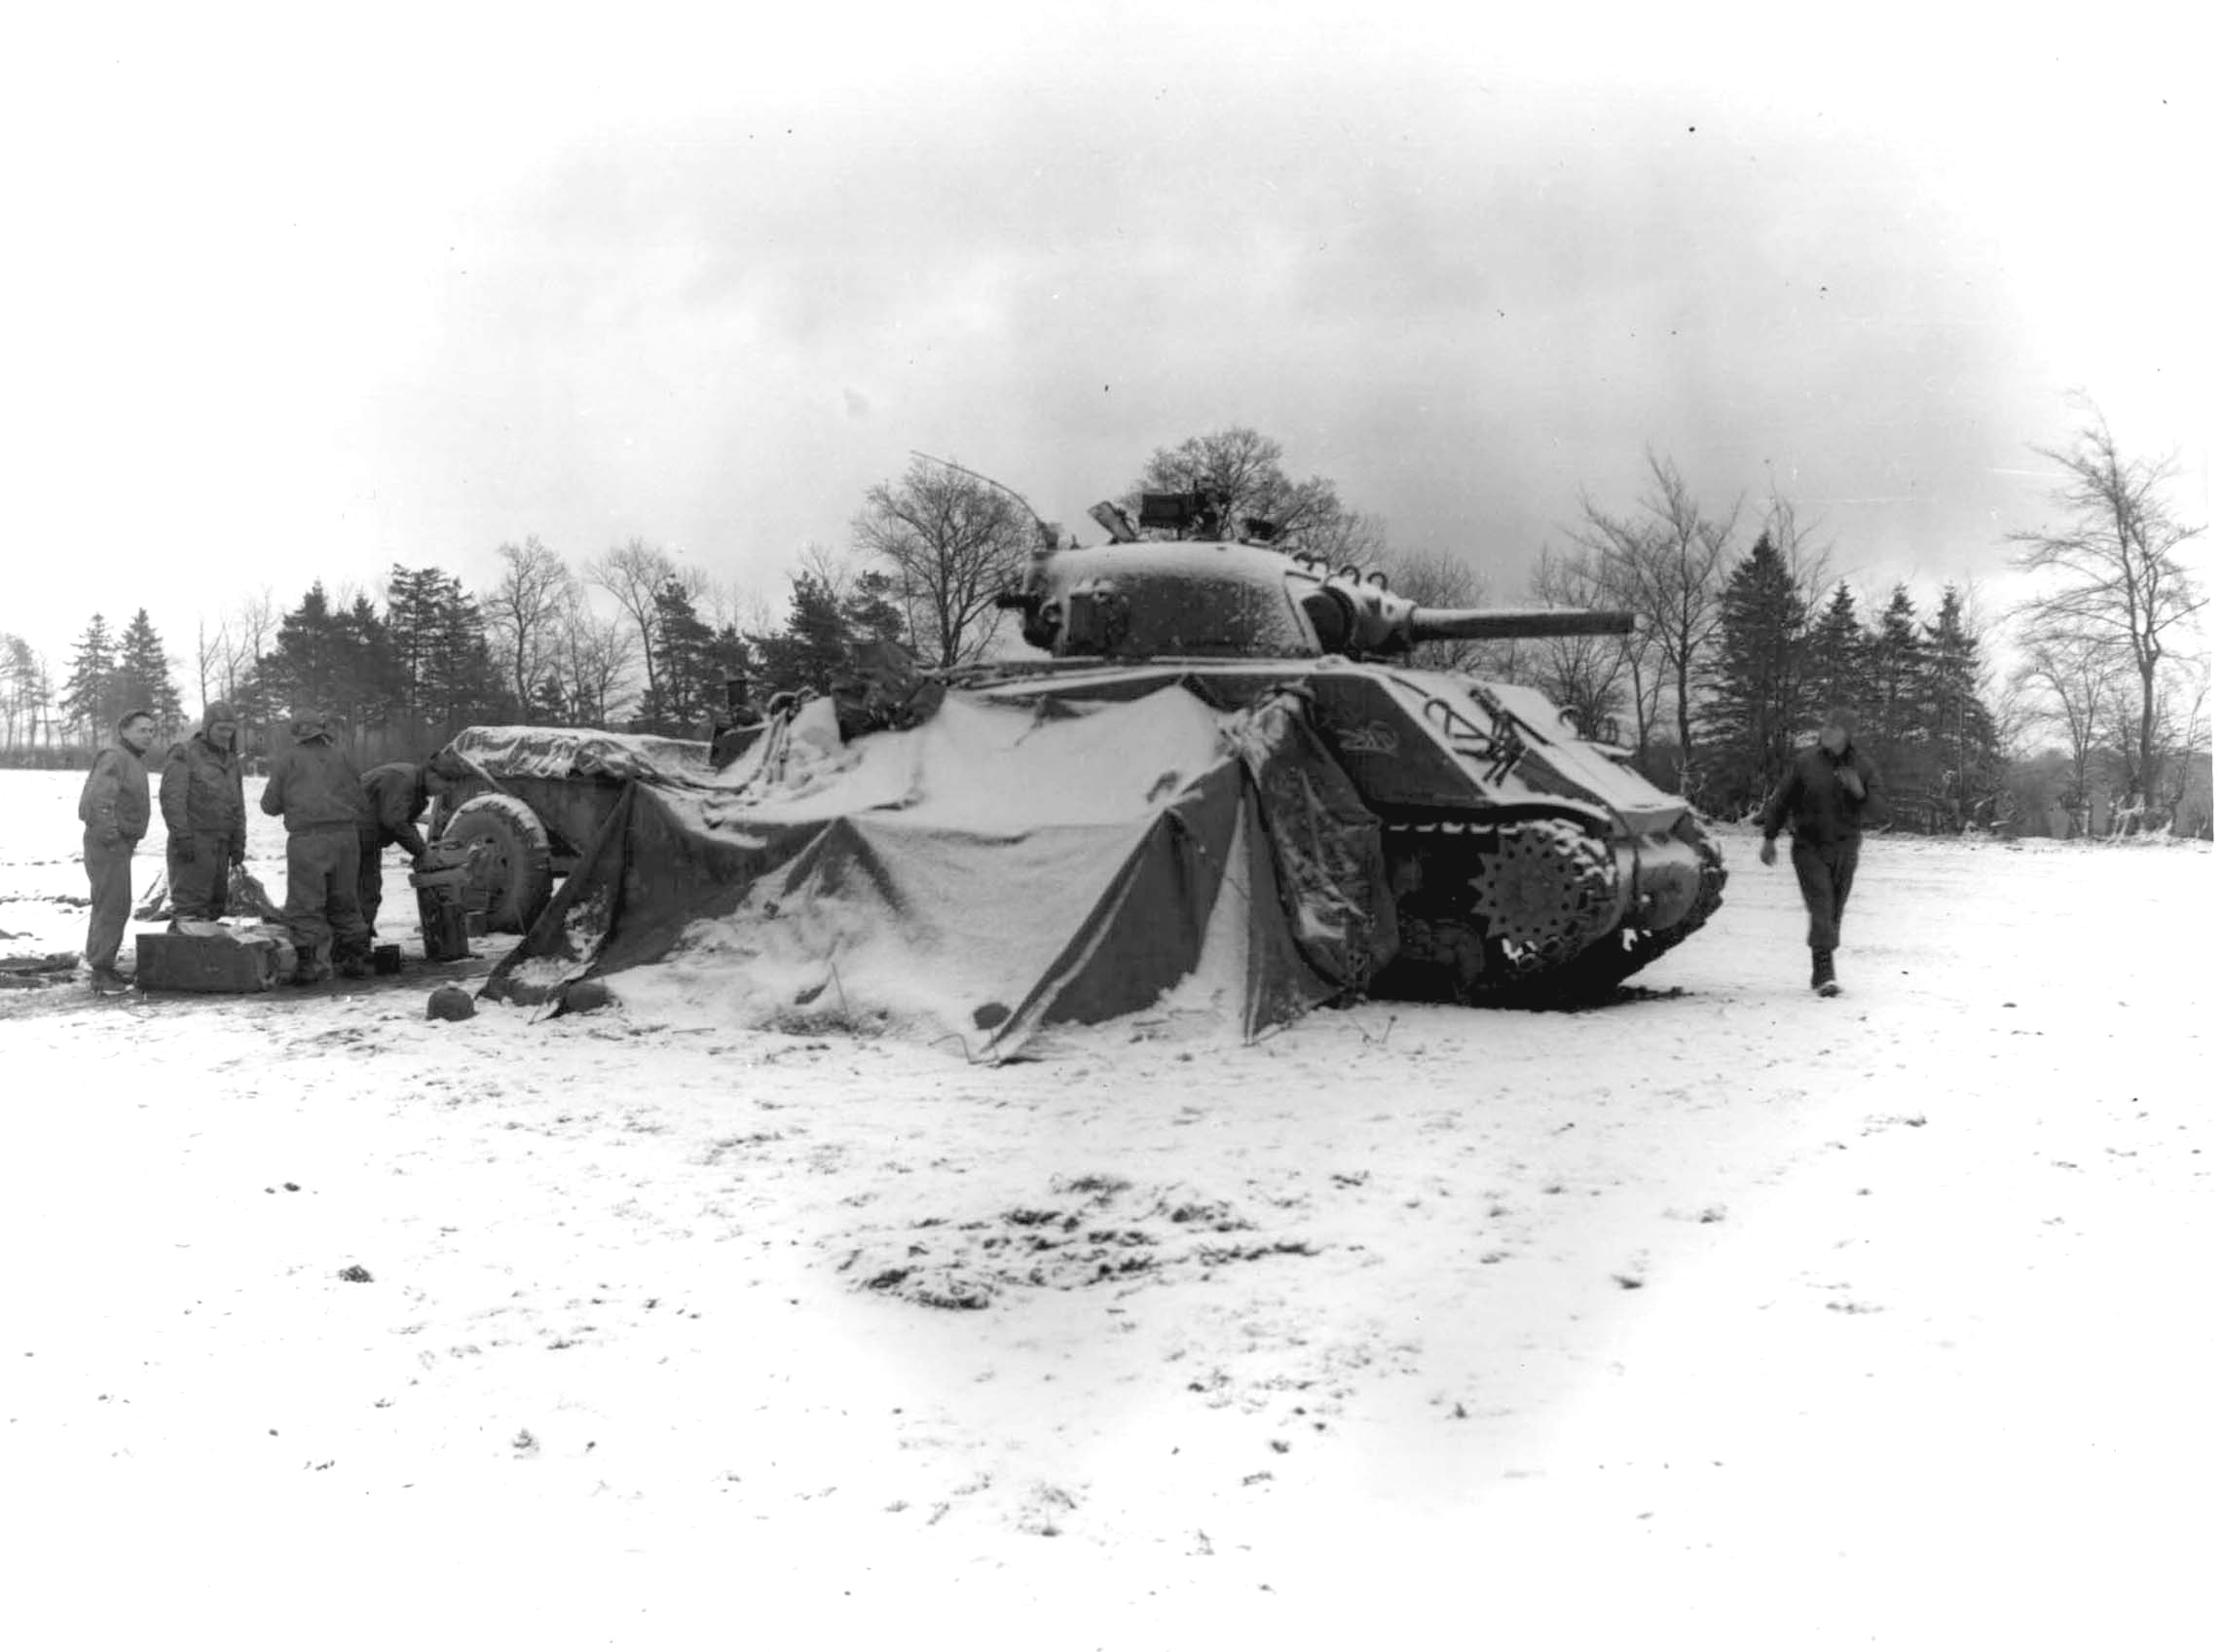 US 5th Armored Regiment tankers gathering around a fire and opening Christmas presents, near Eupen, Belgium, 30 Dec 1944; note M4 Sherman tank